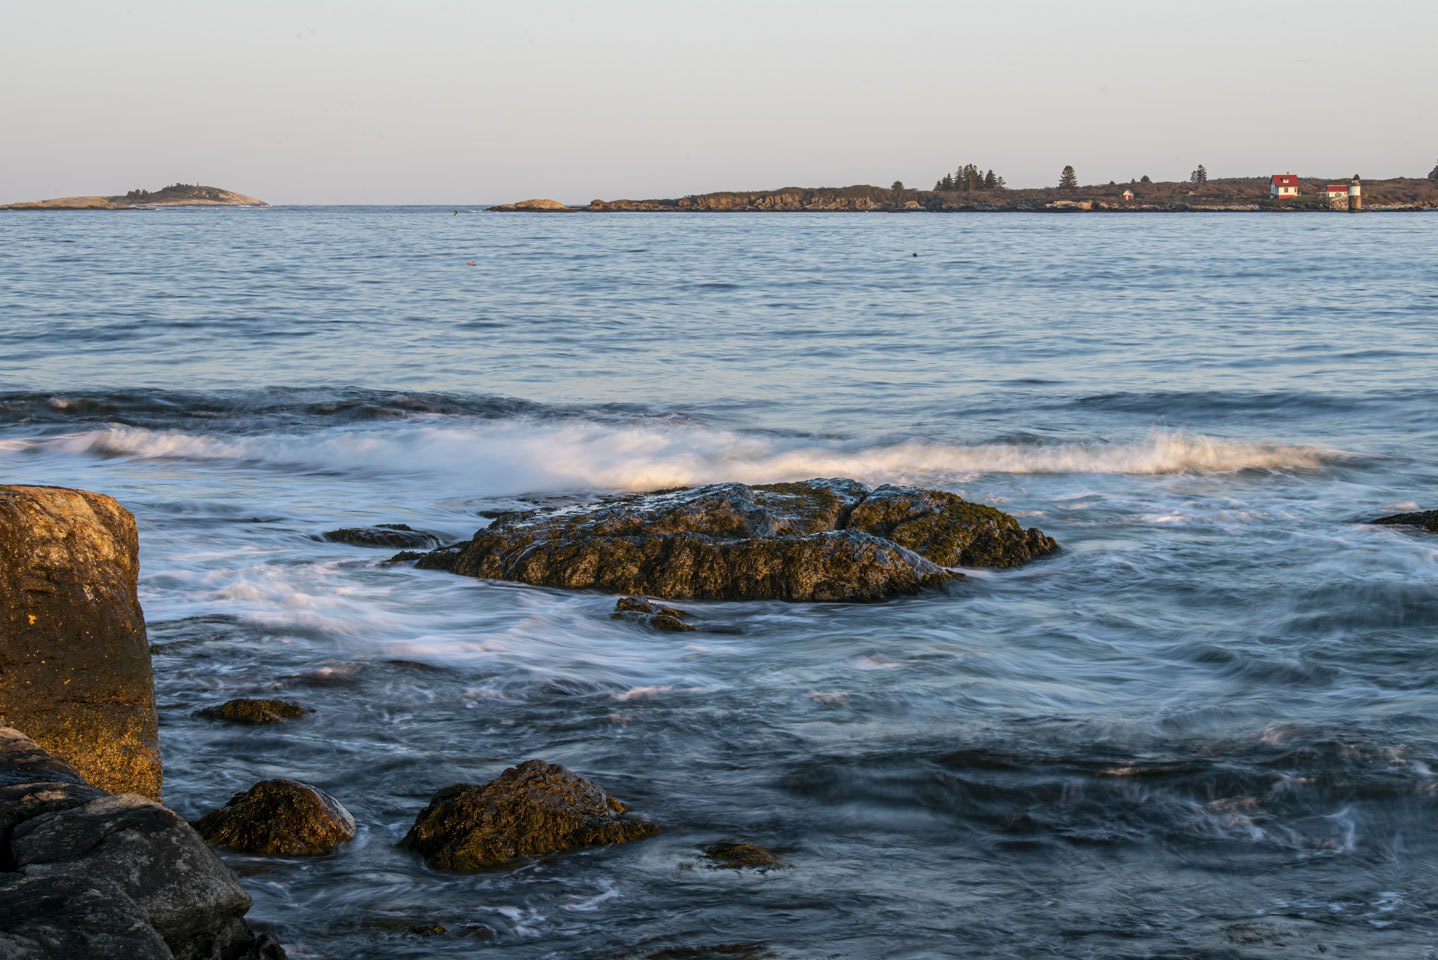 A wave with Ram Island Lighthouse in the background of the photo